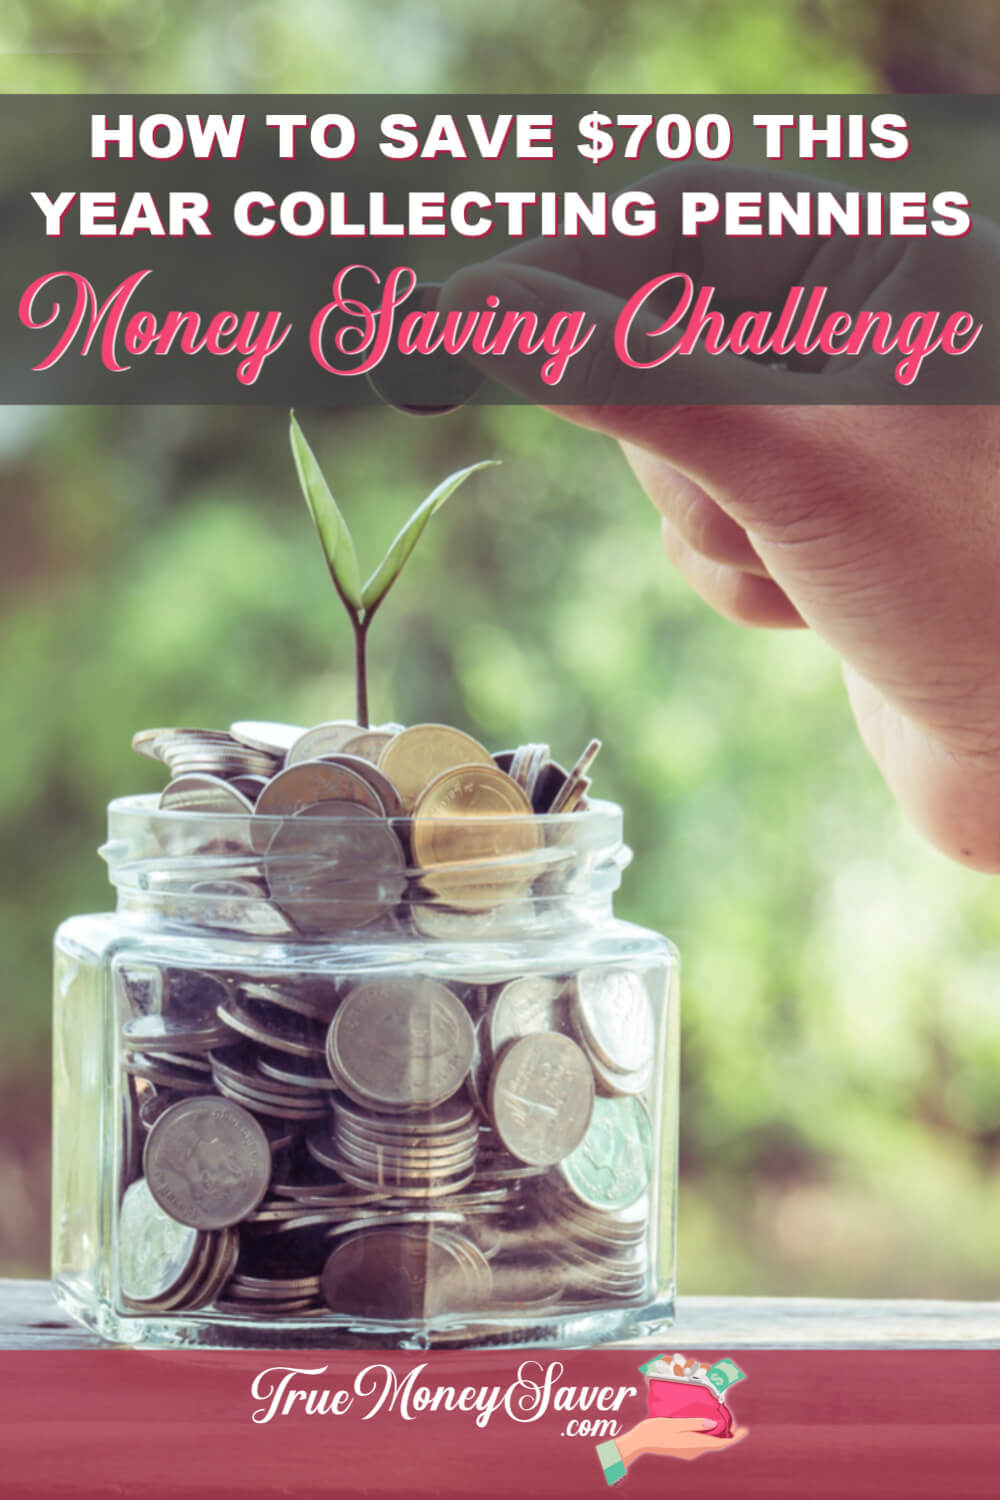 10 Easy Ways To Do A 52 Week Money Saving Challenge (And Save $700!)